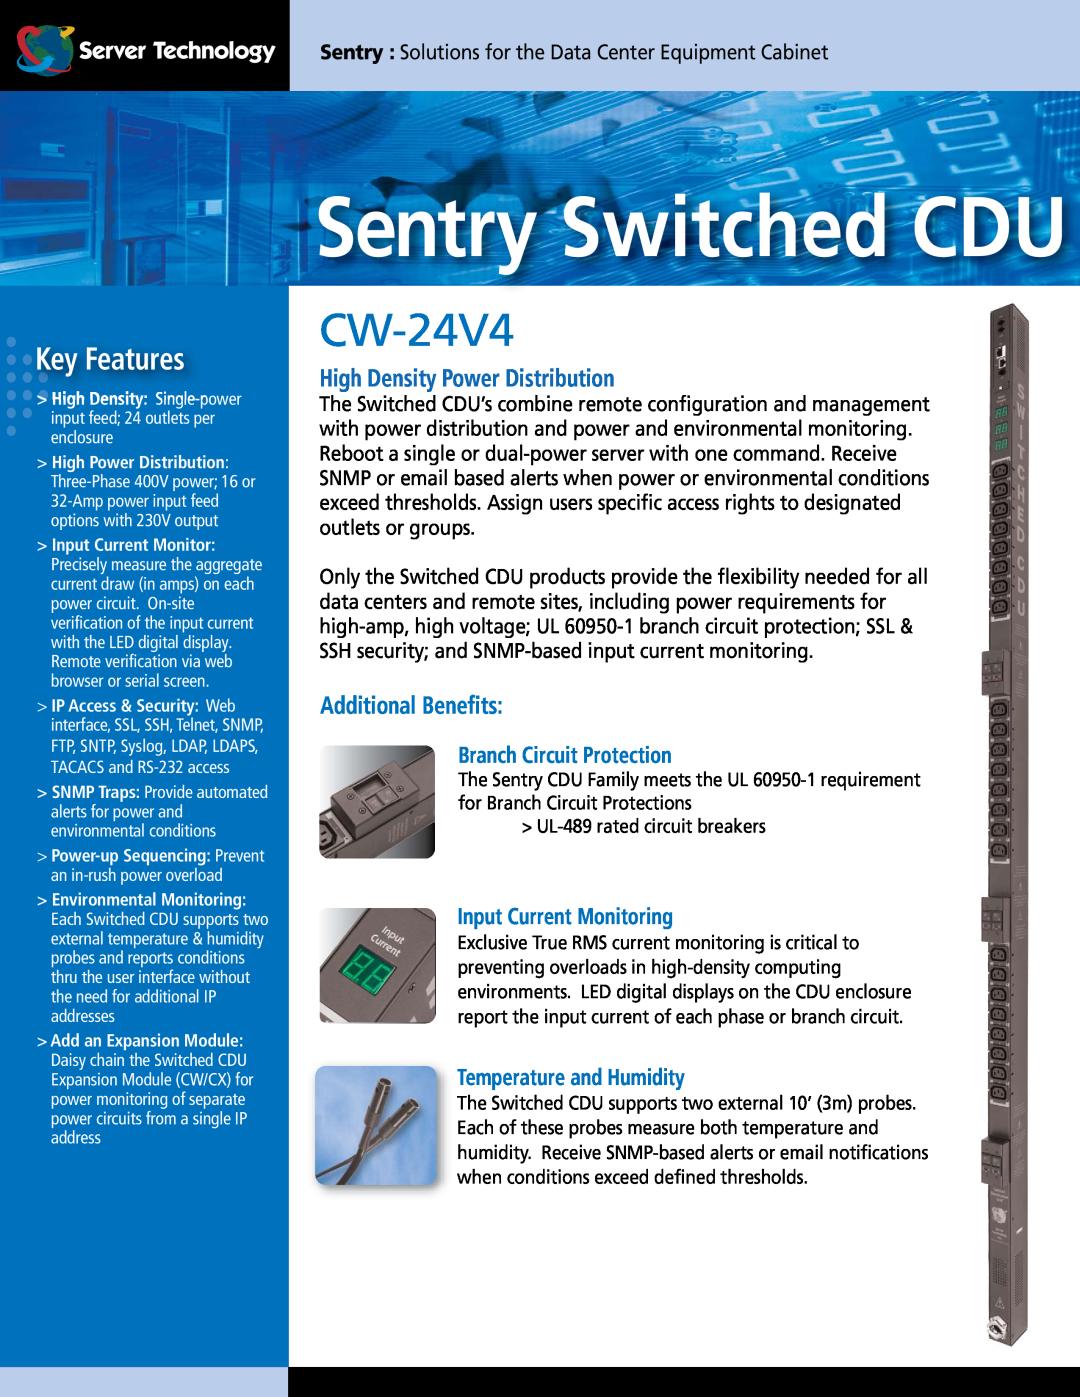 Server Technology CDUCW-24V4 specifications Sentry Switched CDU, Key Features, High Density Power Distribution 